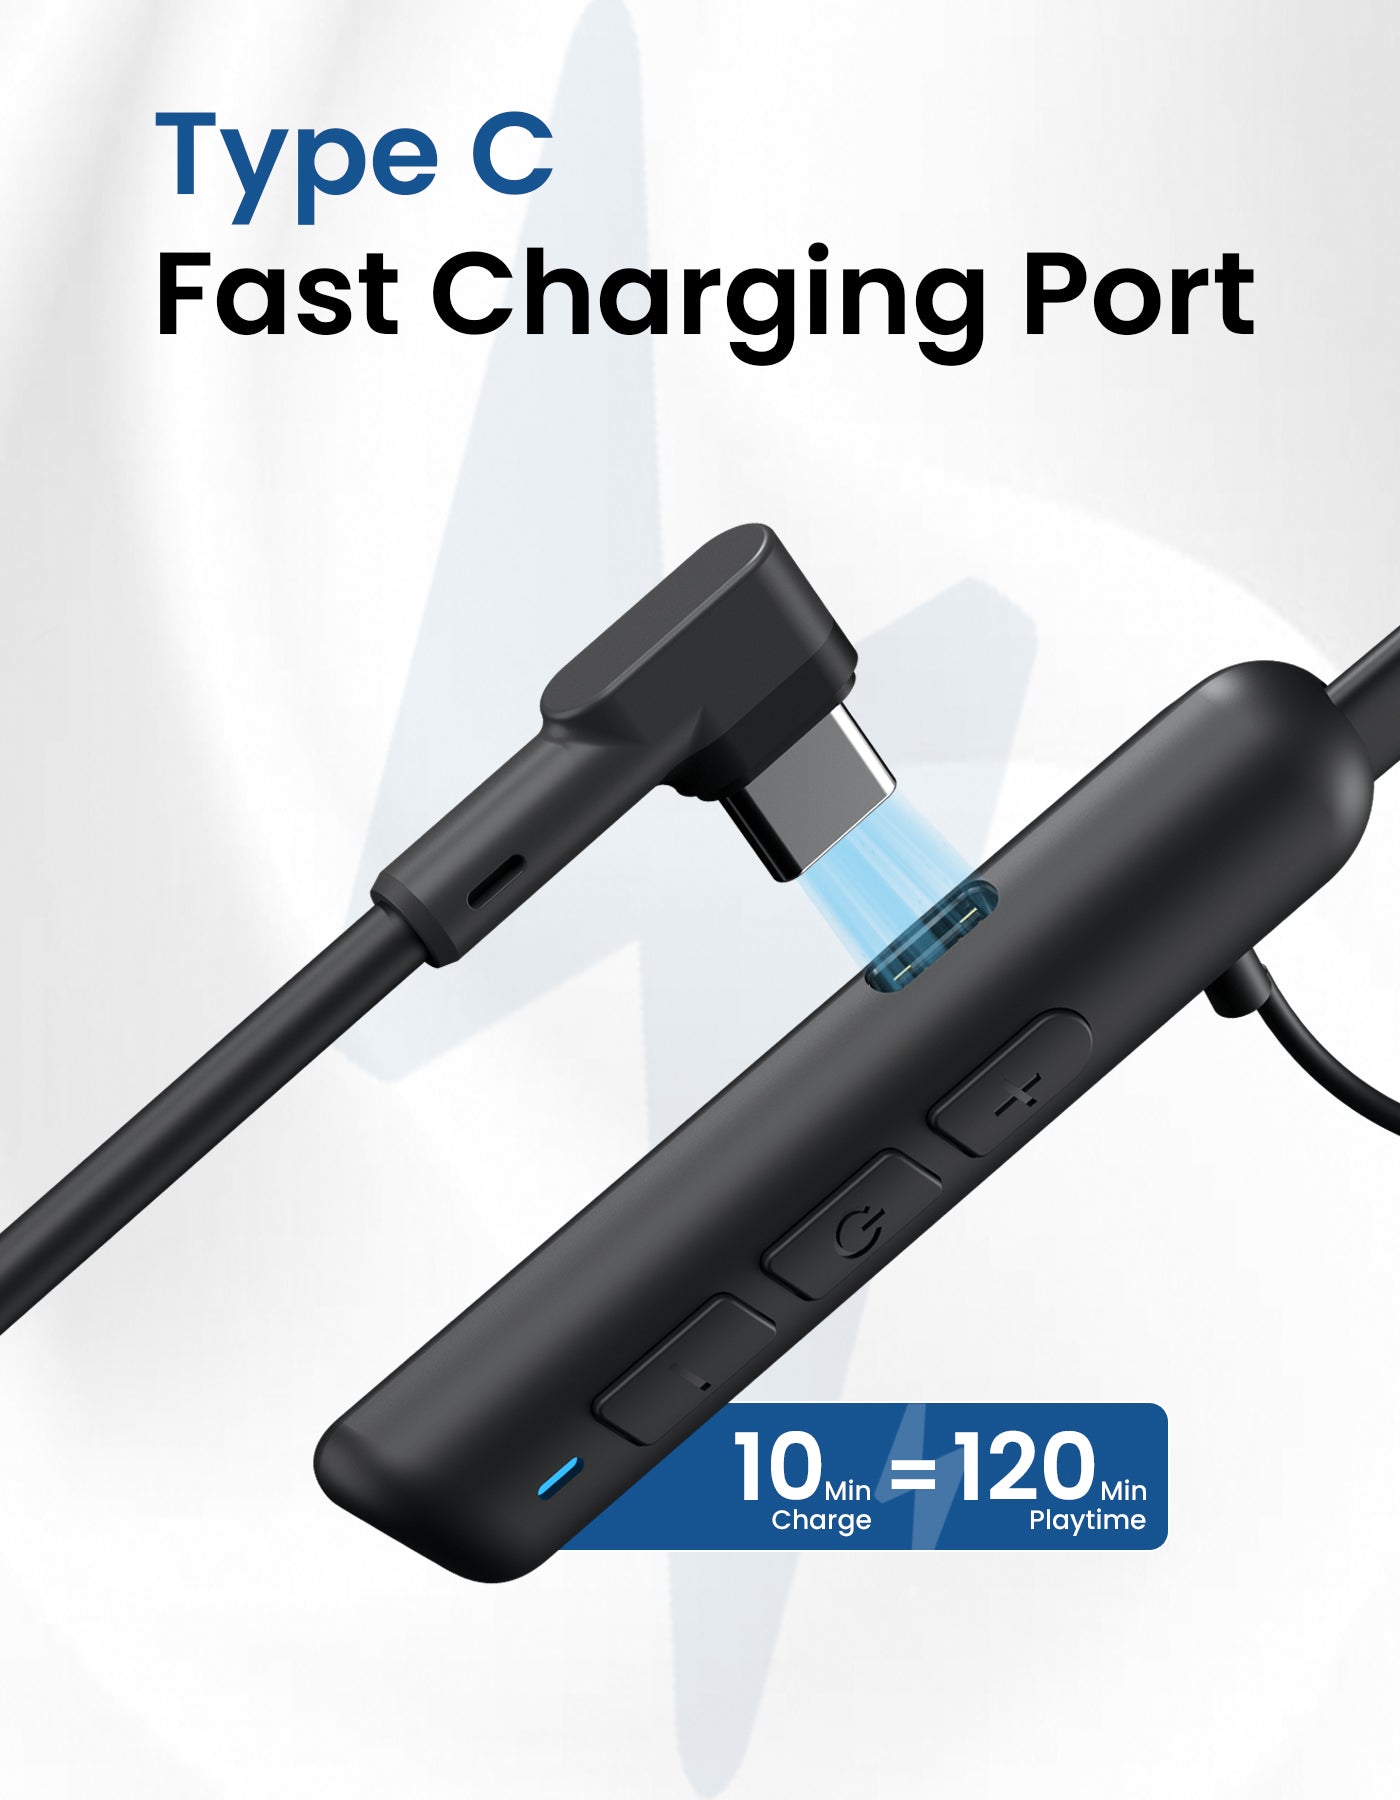 Portronics Harmonics Z10 wireless stereo neckband in-earphones| bluetooth neckband comes with type c fast charging port